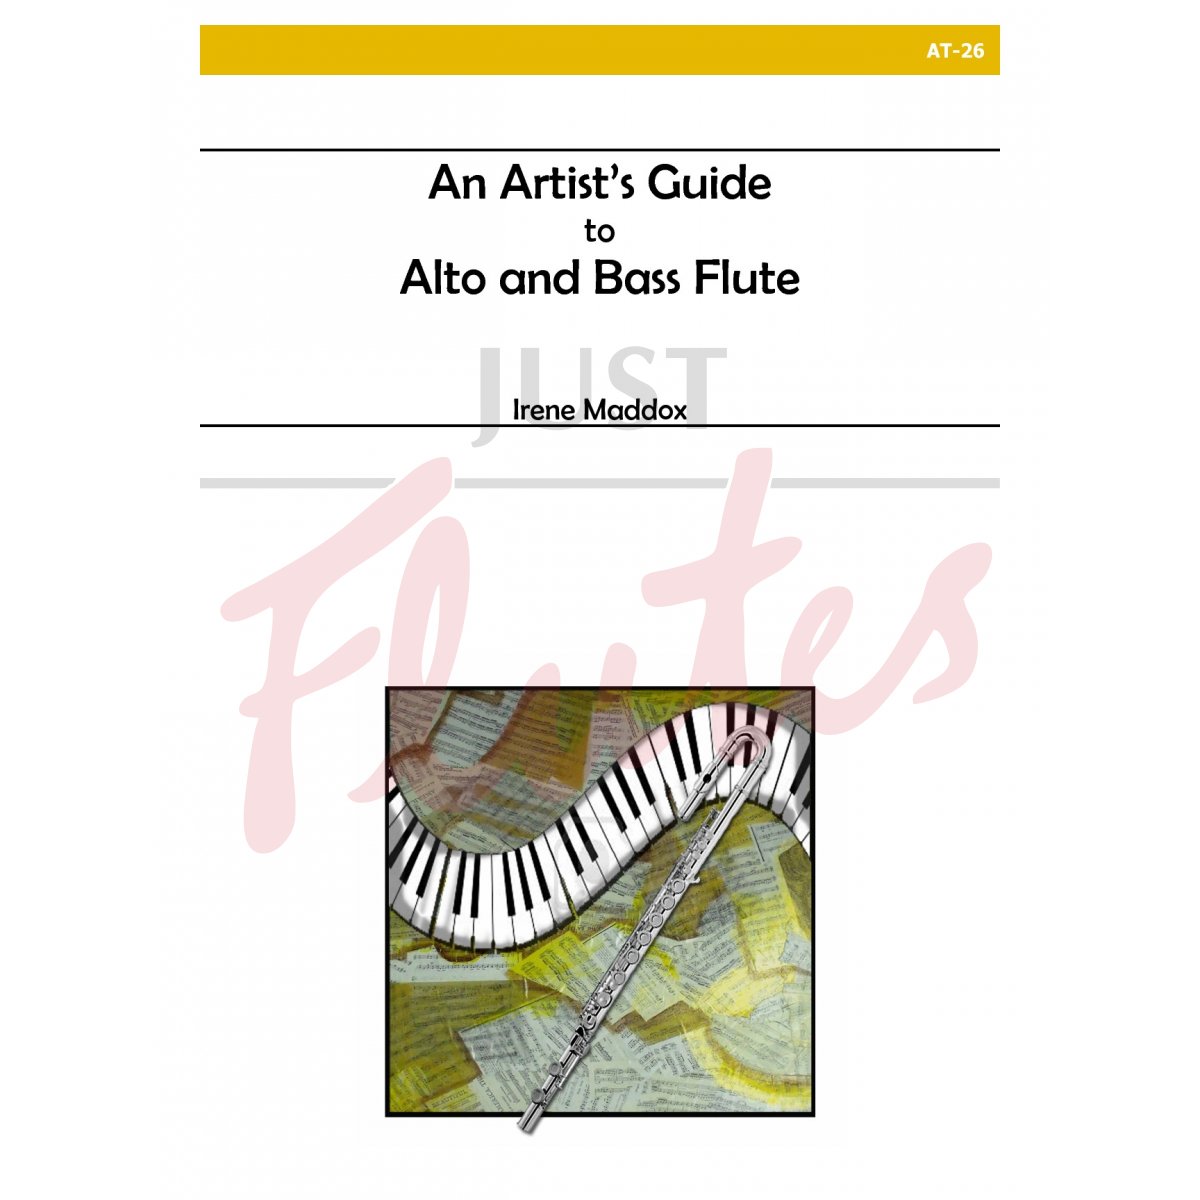 An Artist's Guide to Alto and Bass Flute